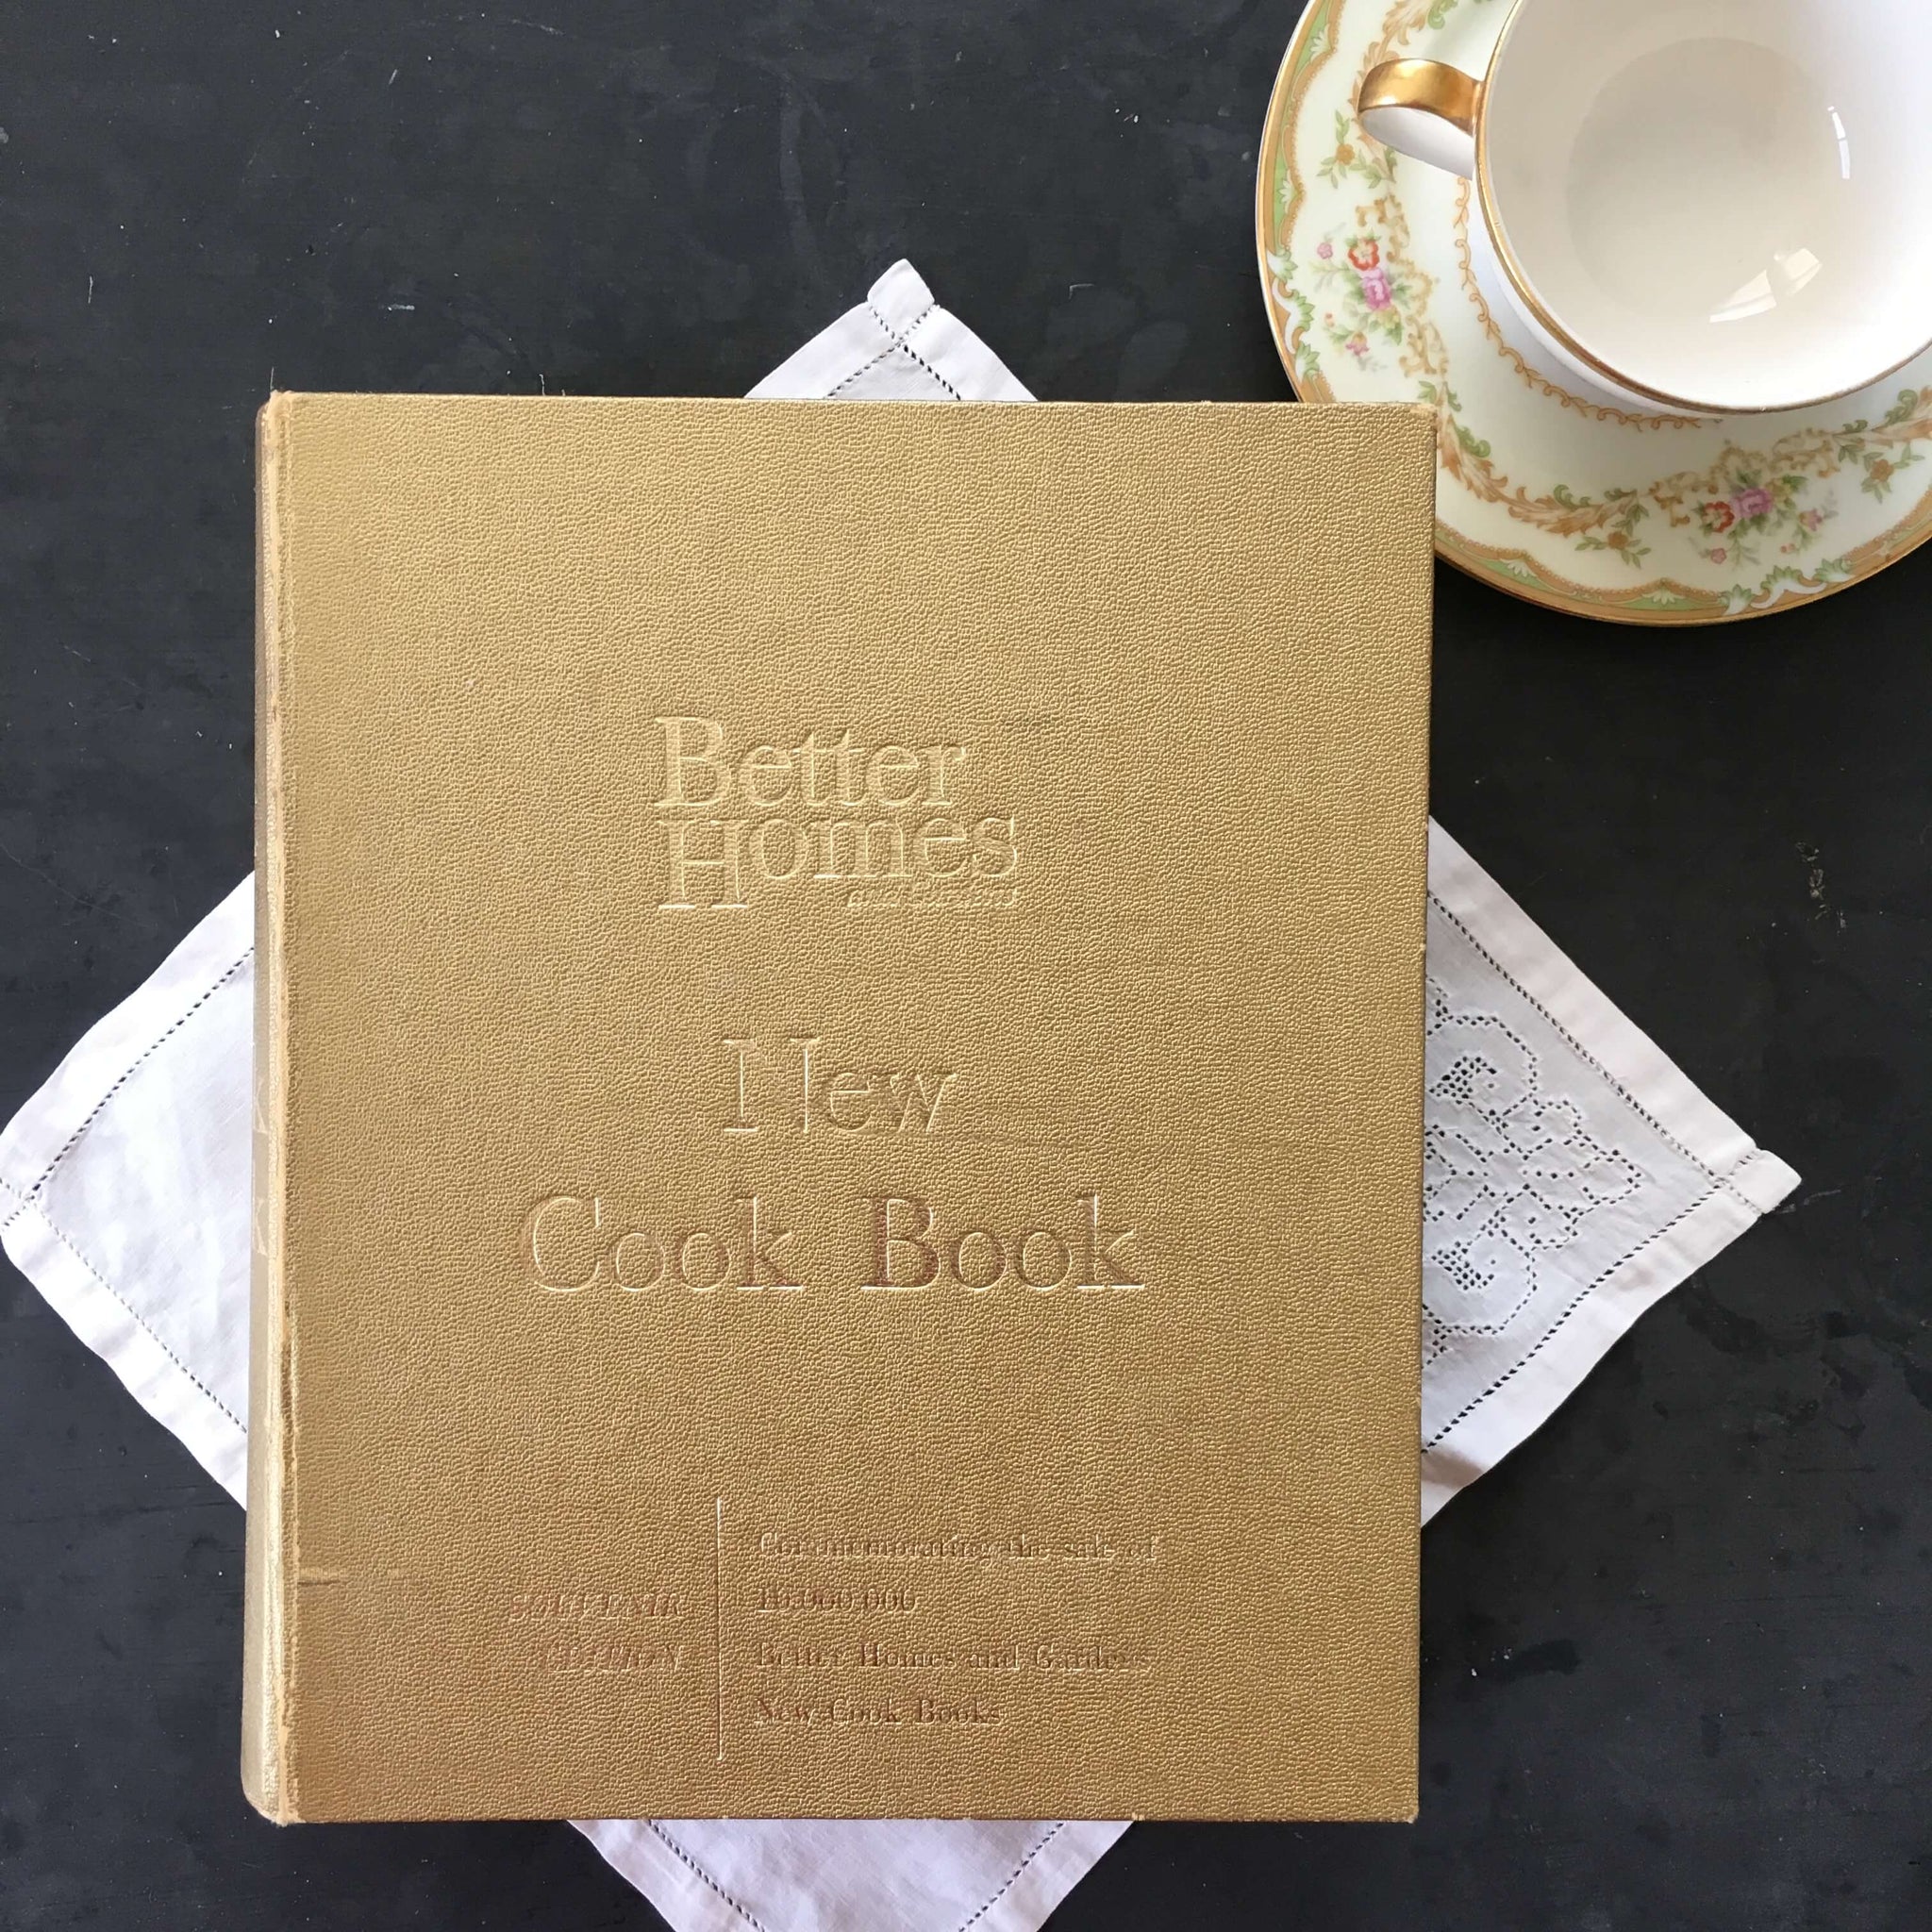 Better Homes and Gardens Plaid Ser.: New Cook Book : Gifts from